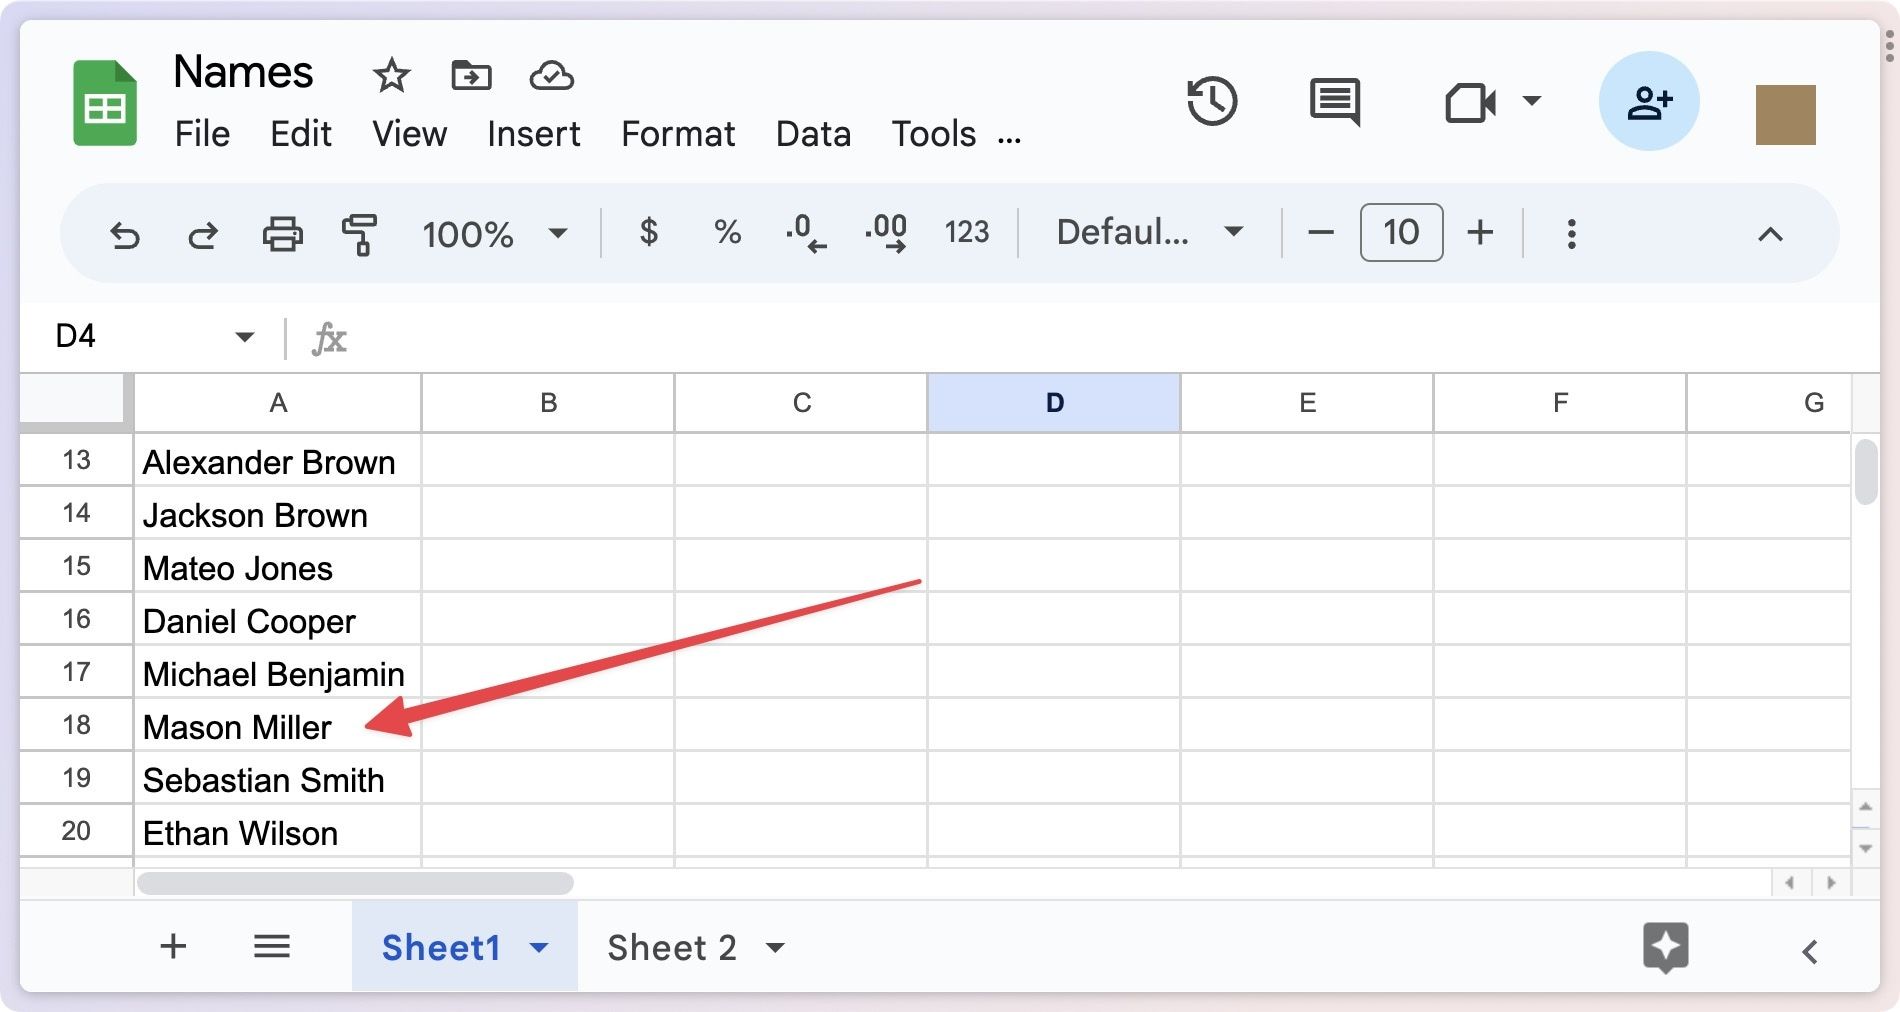 cross-checking the result of Match function in Google Sheets 